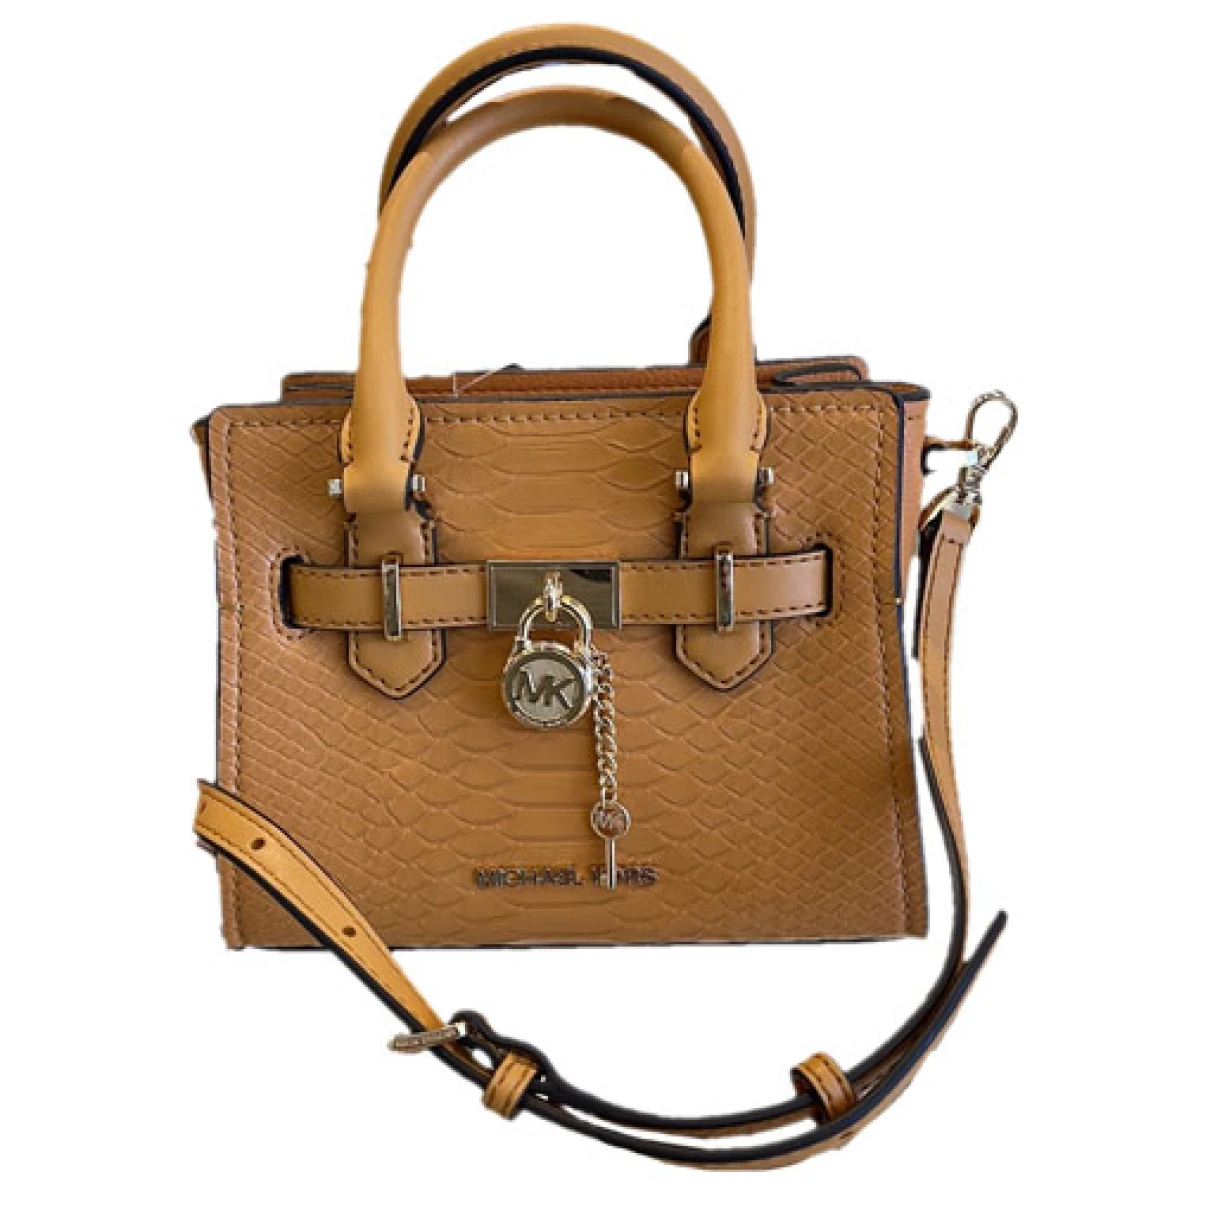 Pre-owned Michael Kors Hamilton Leather Satchel In Camel